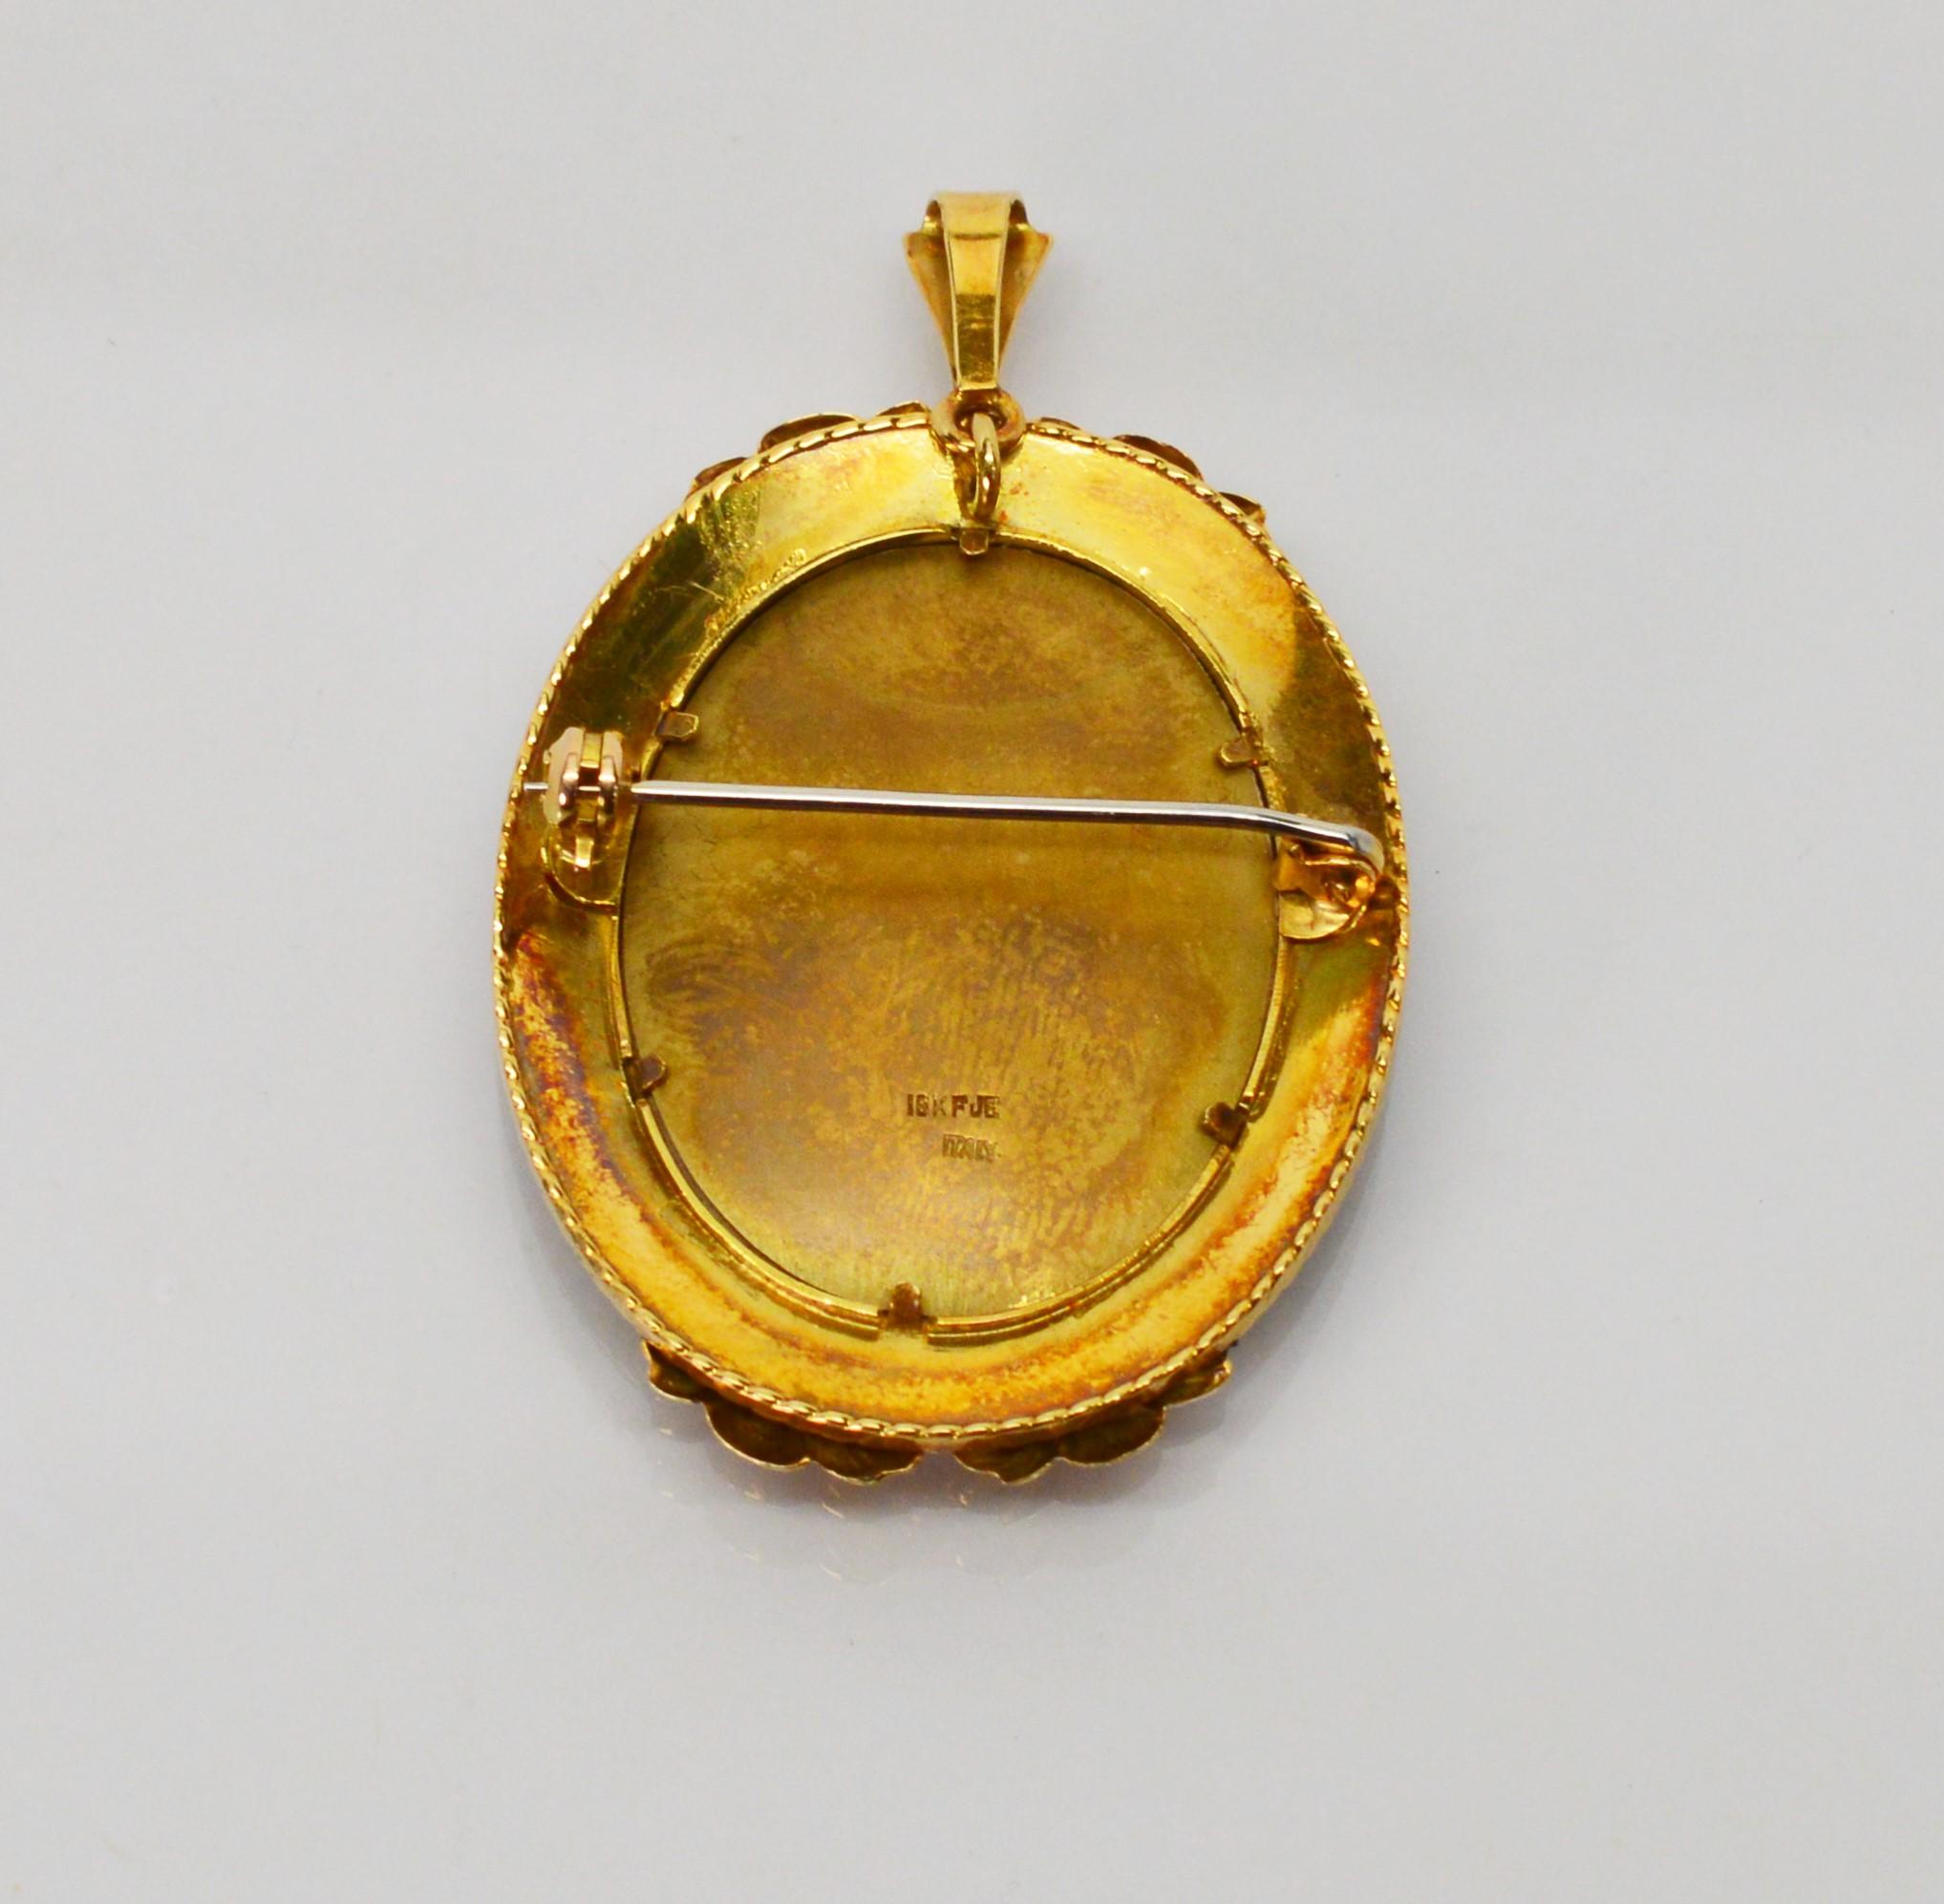 Exquisite Italian made hand painted portrait brooch pendant from the Victorian era. Made of eighteen karat yellow gold, this unique piece presents a finely painted oil on porcelain portrait of a beautiful lady aristocrat crowned with a genuine